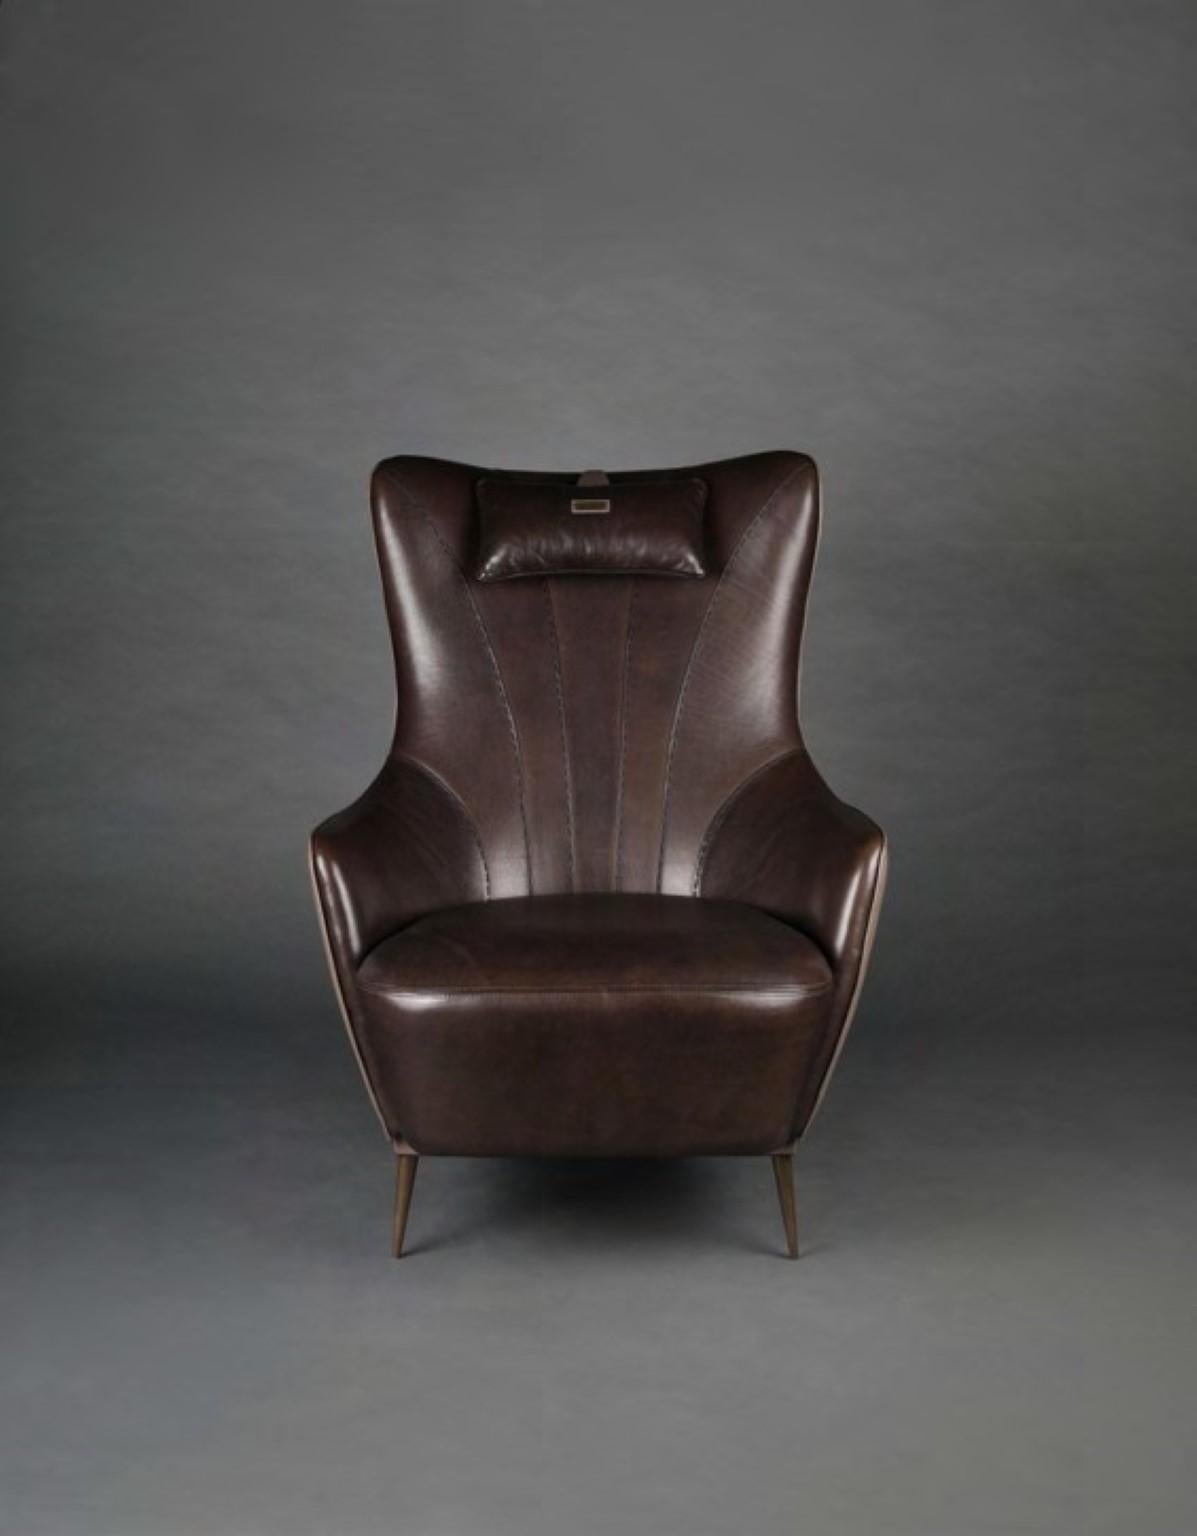 Duke leather armchair by Madheke.
Dimensions: W 97.2 x D 77.4 x H 106.2 cm.
Materials: Wood, leather, metal.

Leather upholstered back with deep leather upholstered seat and back. handstitched detail with neck cushion.

Reflecting the finest